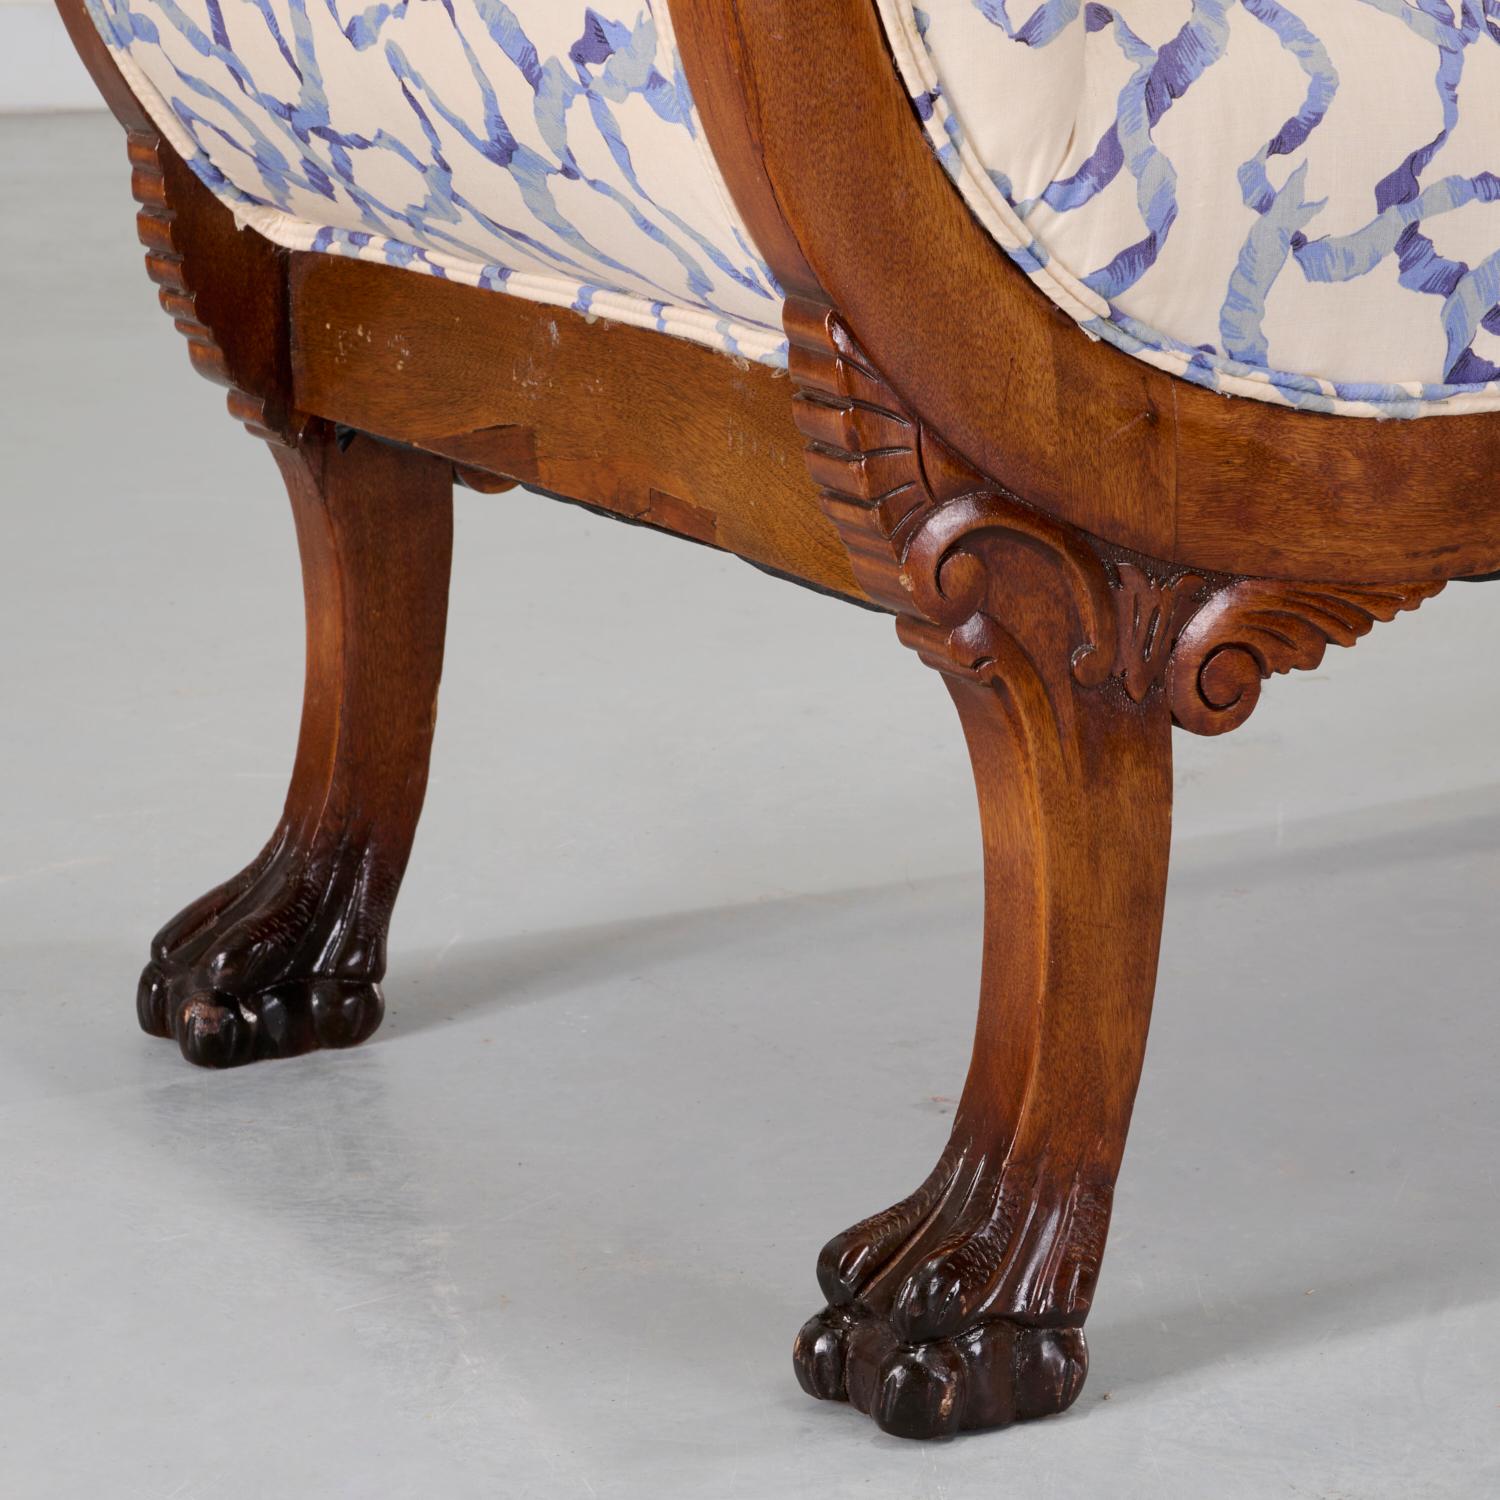 19th/20th C. Printed Linen Upholstered American Empire Mahogany Paw Foot Bench For Sale 1